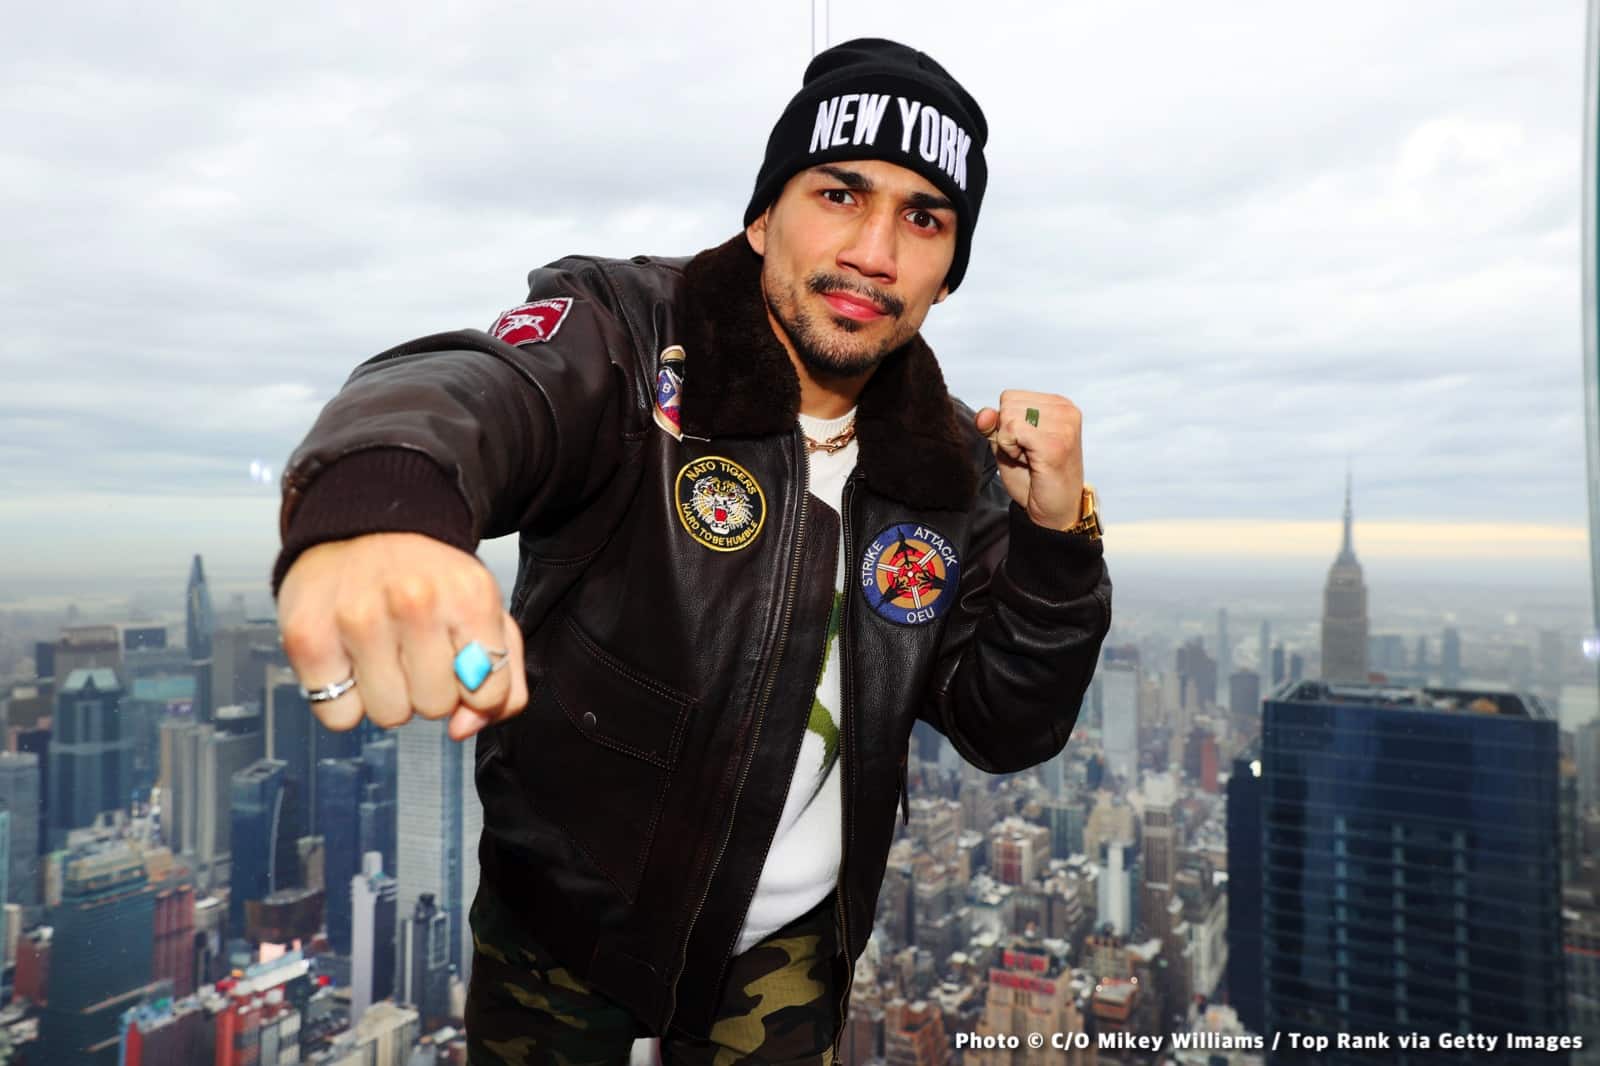 Teofimo Lopez challenges Josh Taylor on June 10th in New York City